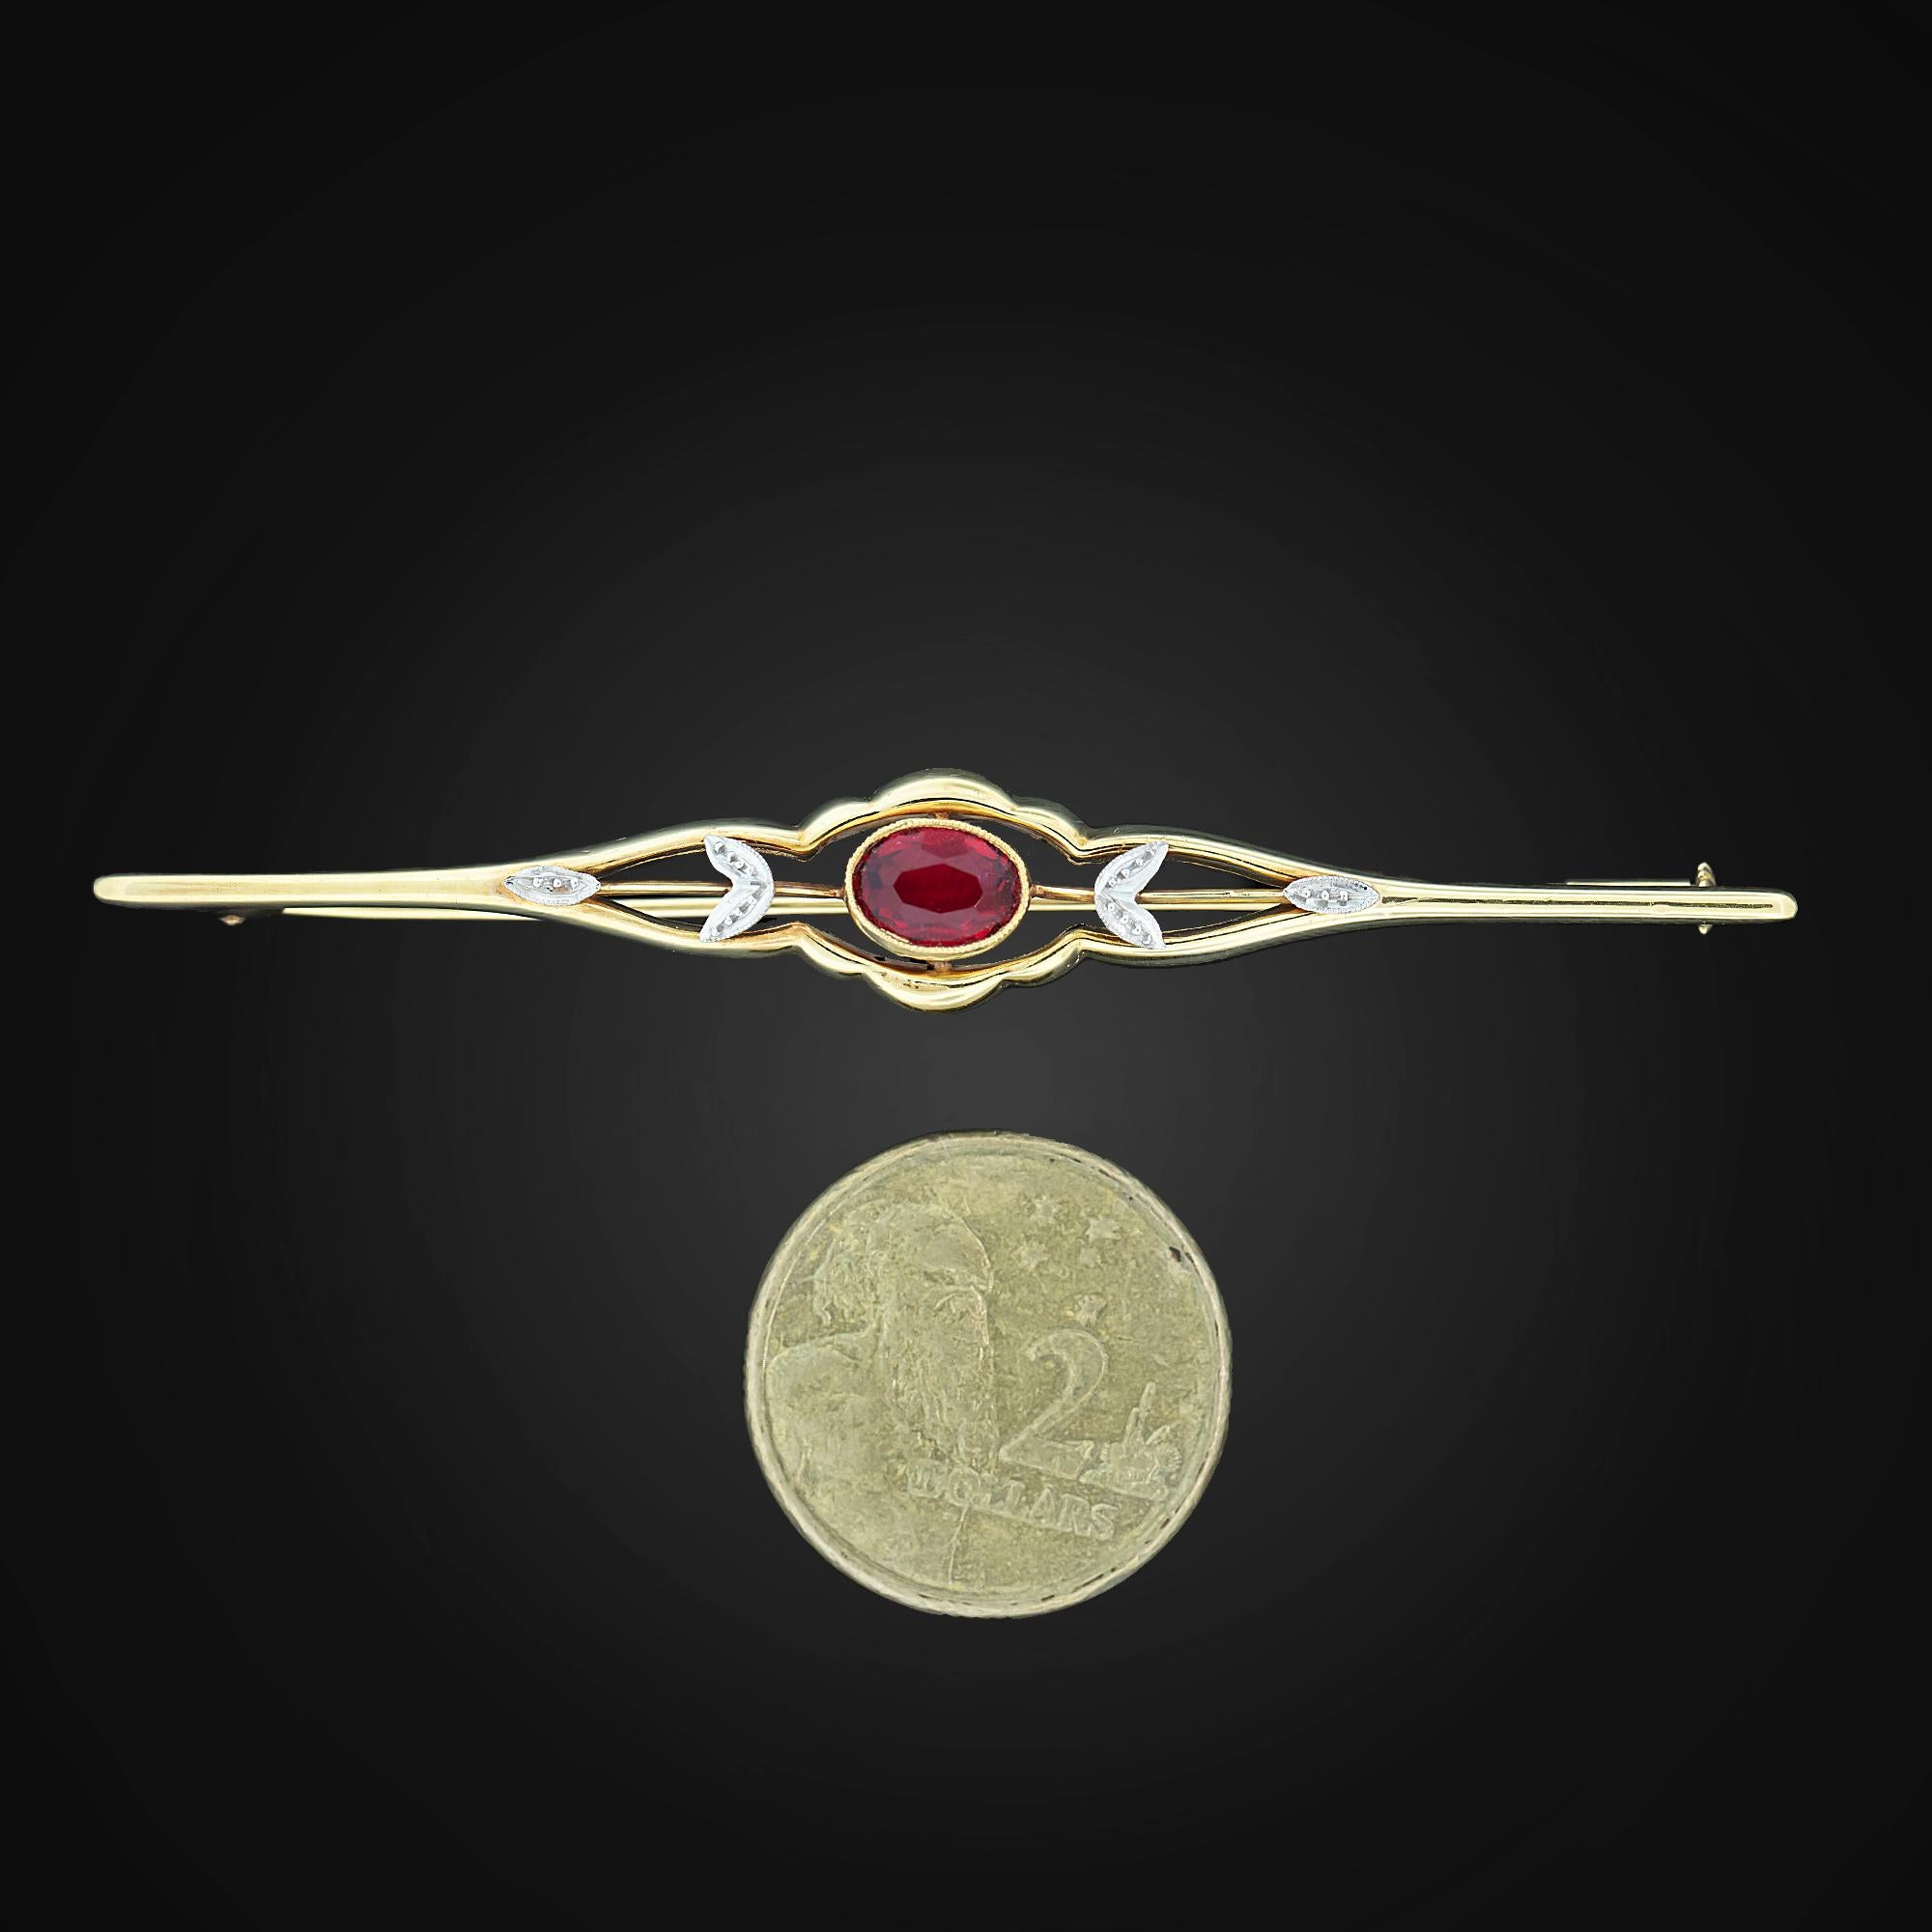 Modern Mid 20th Century Red Paste Bar Brooch Circa 1950's For Sale